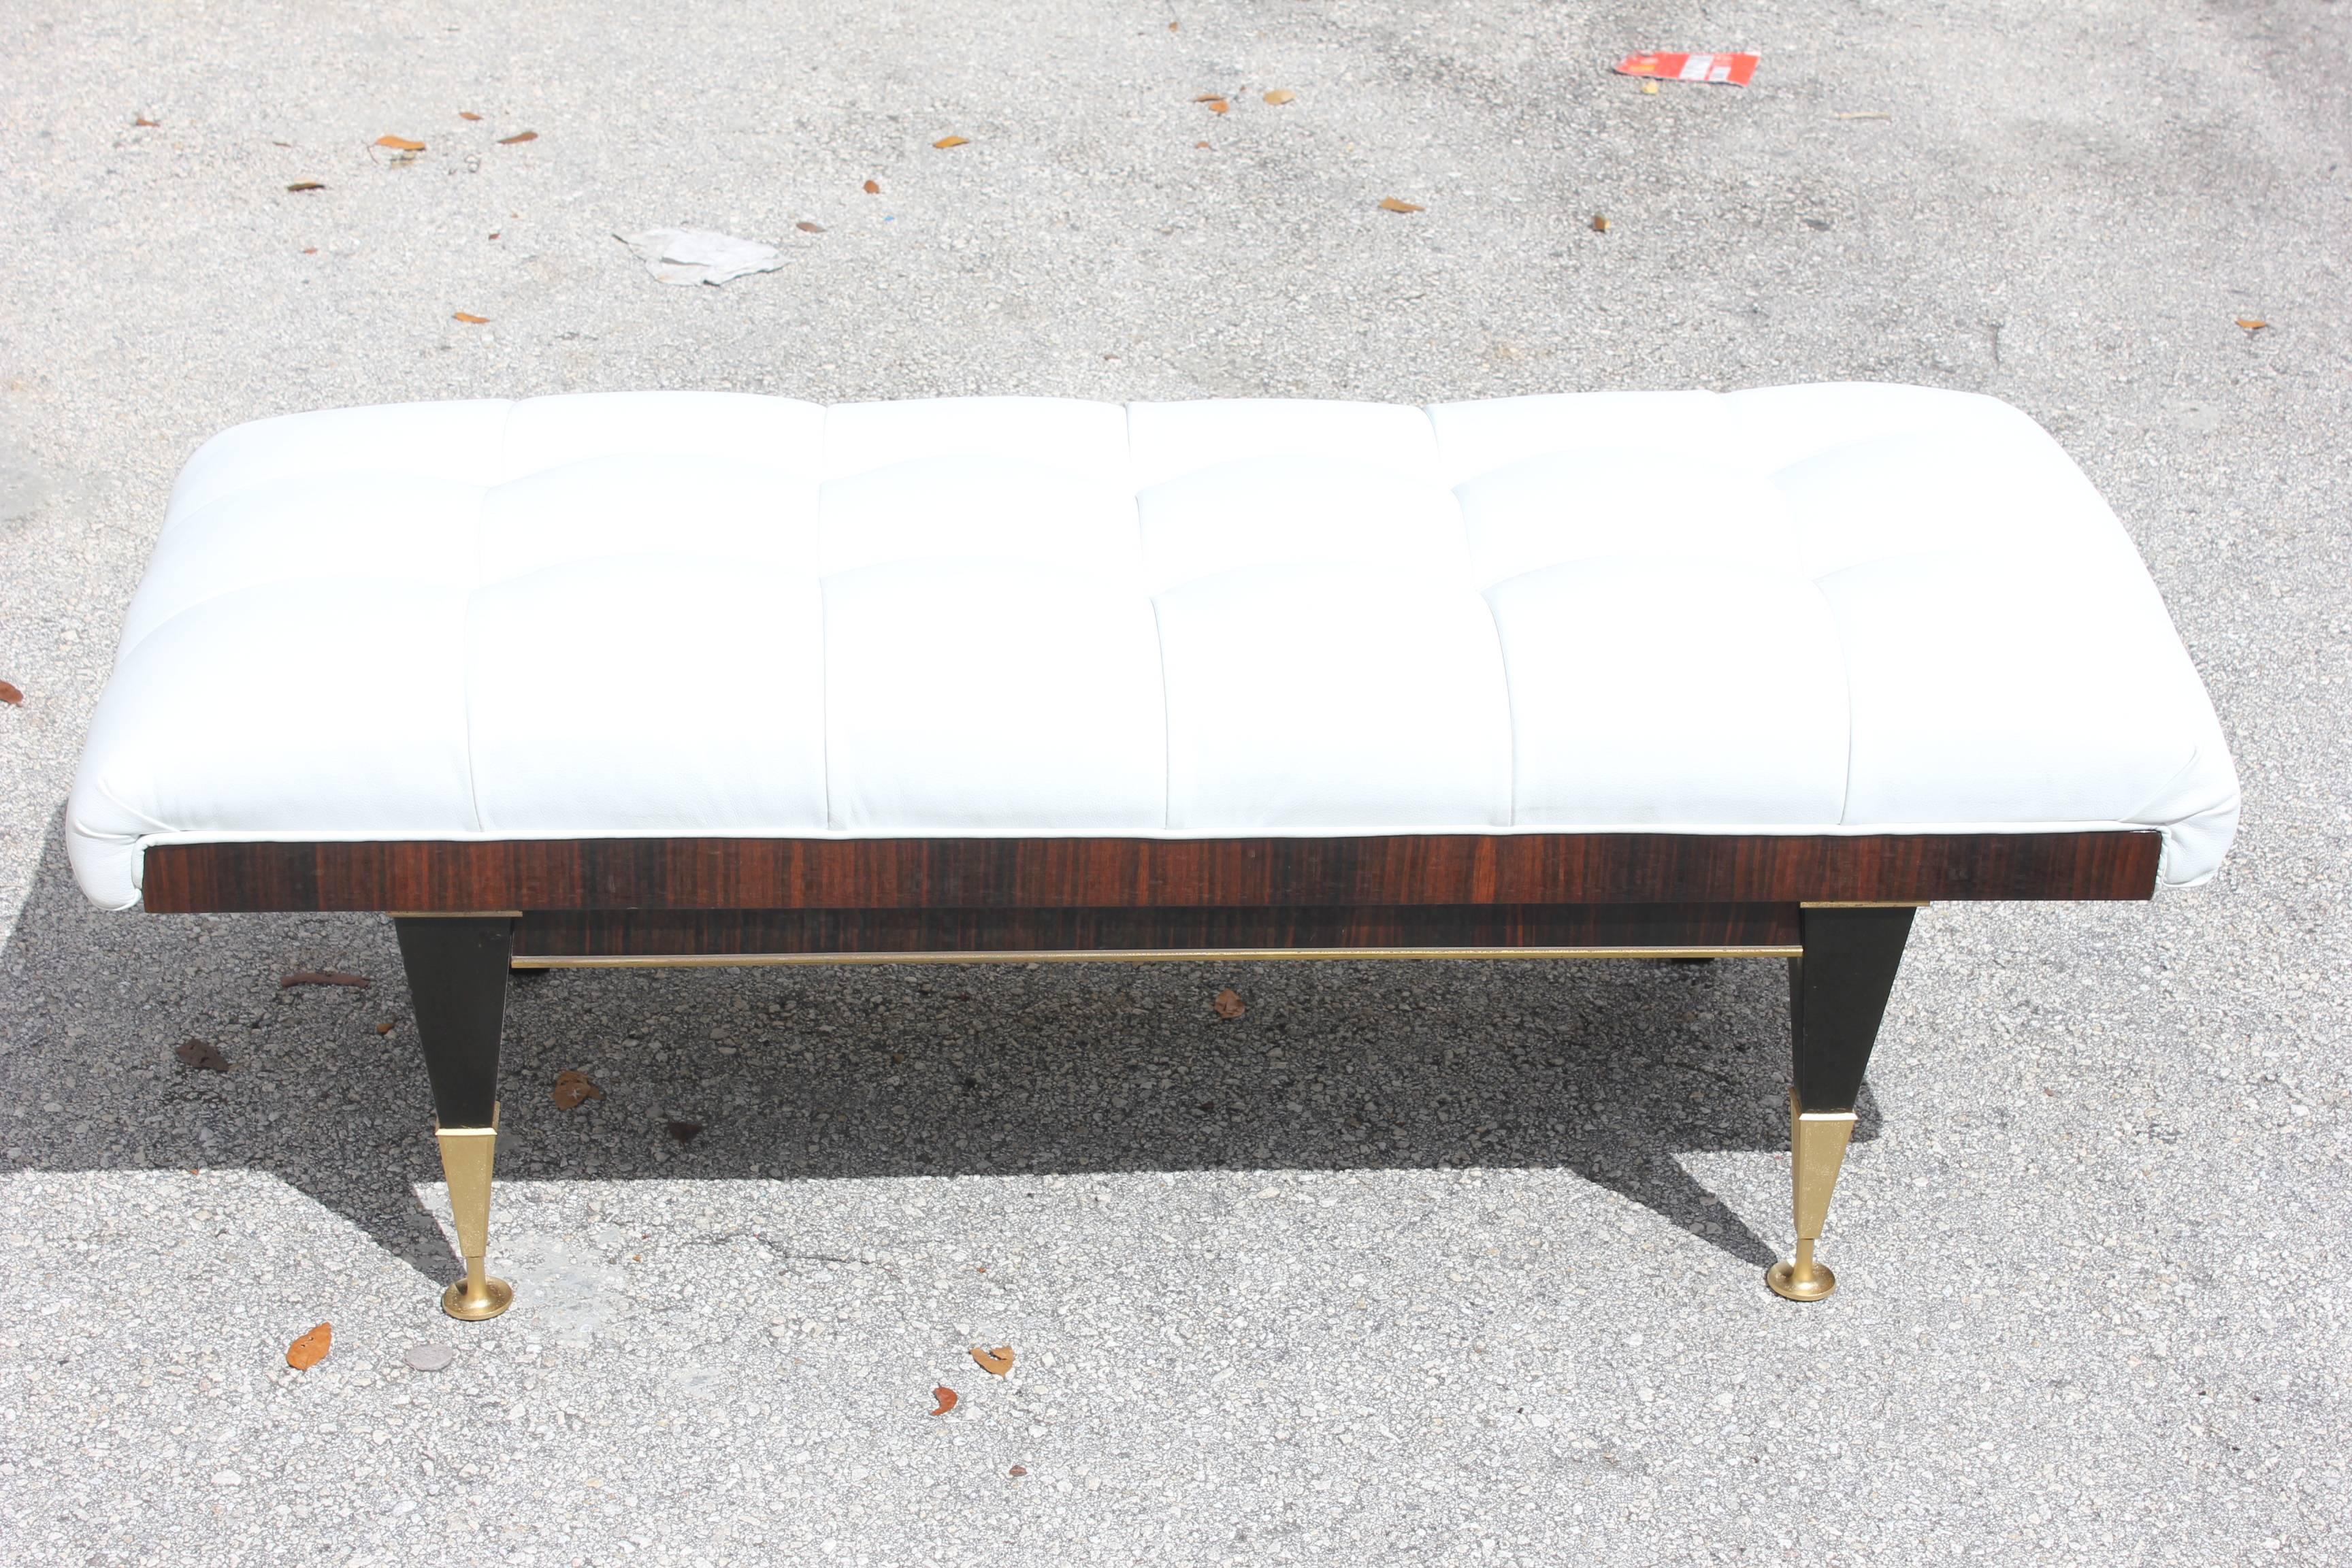 A French Art Deco exotic Macassar ebony "Petite" sitting bench, circa 1940s. Newly upholstered and refinished.